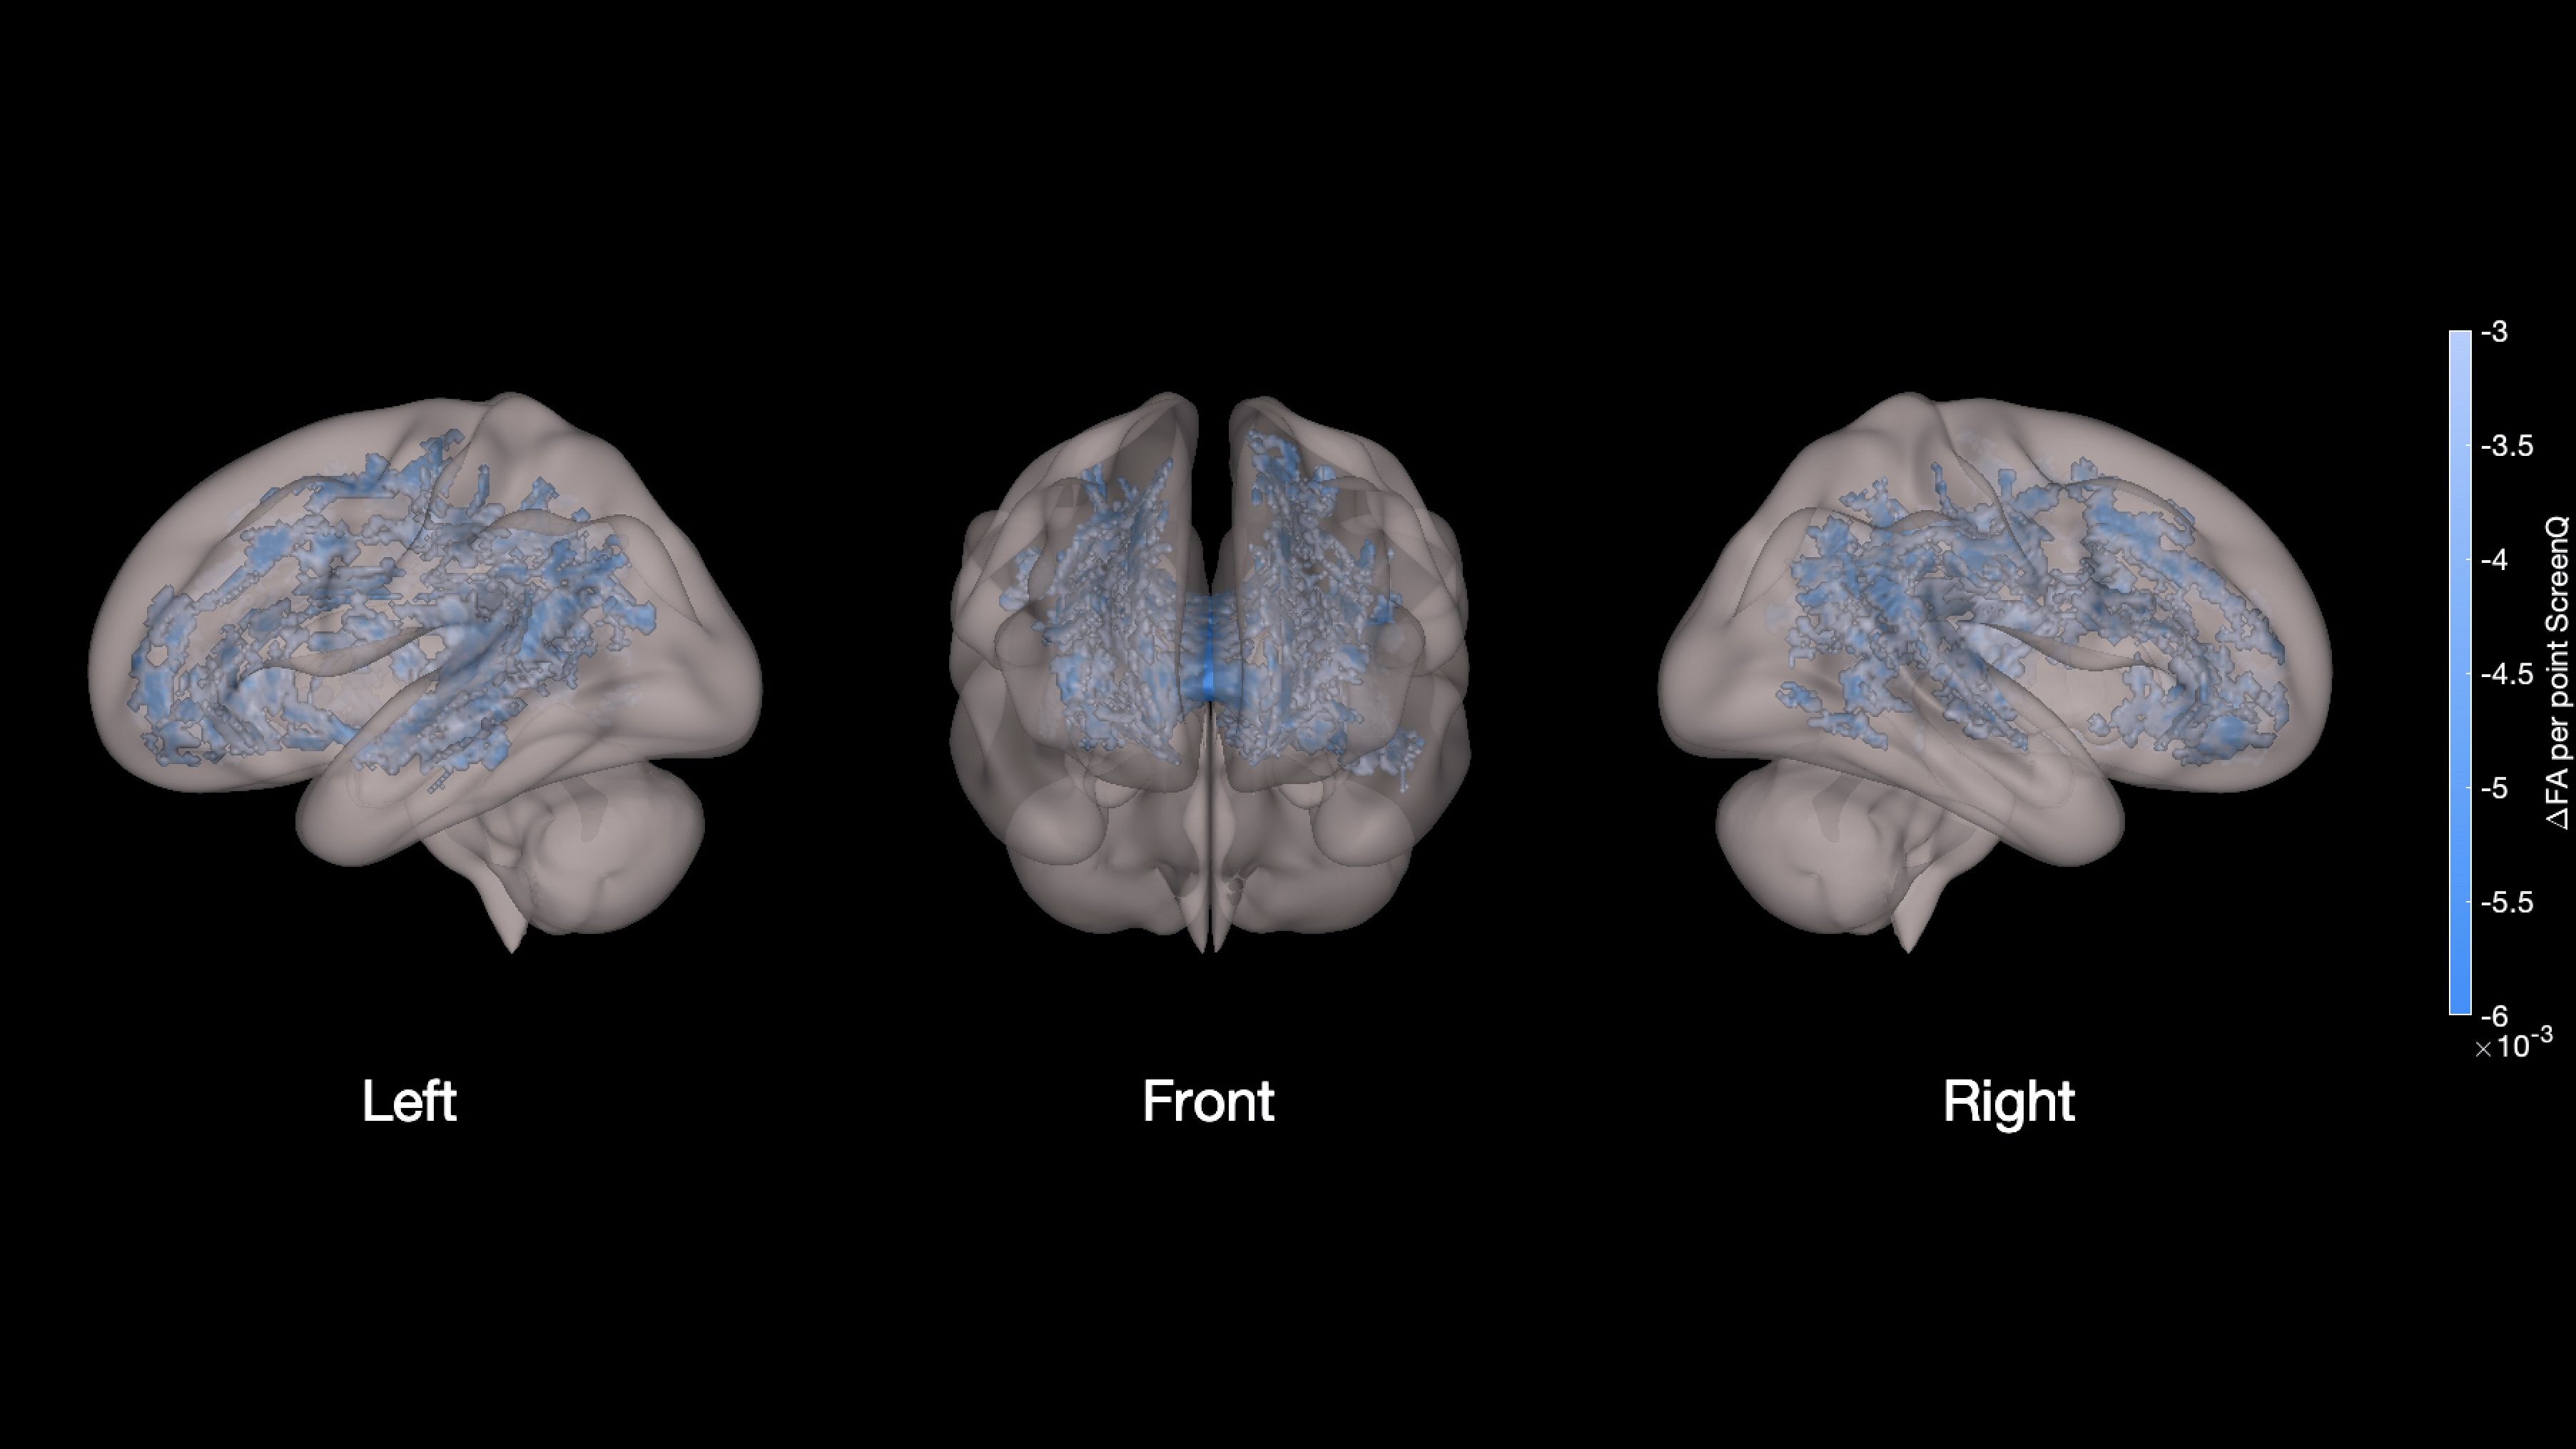 Higher screen use was associated with less well-developed white matter tracts (shown in blue in the image)  throughout the brain.